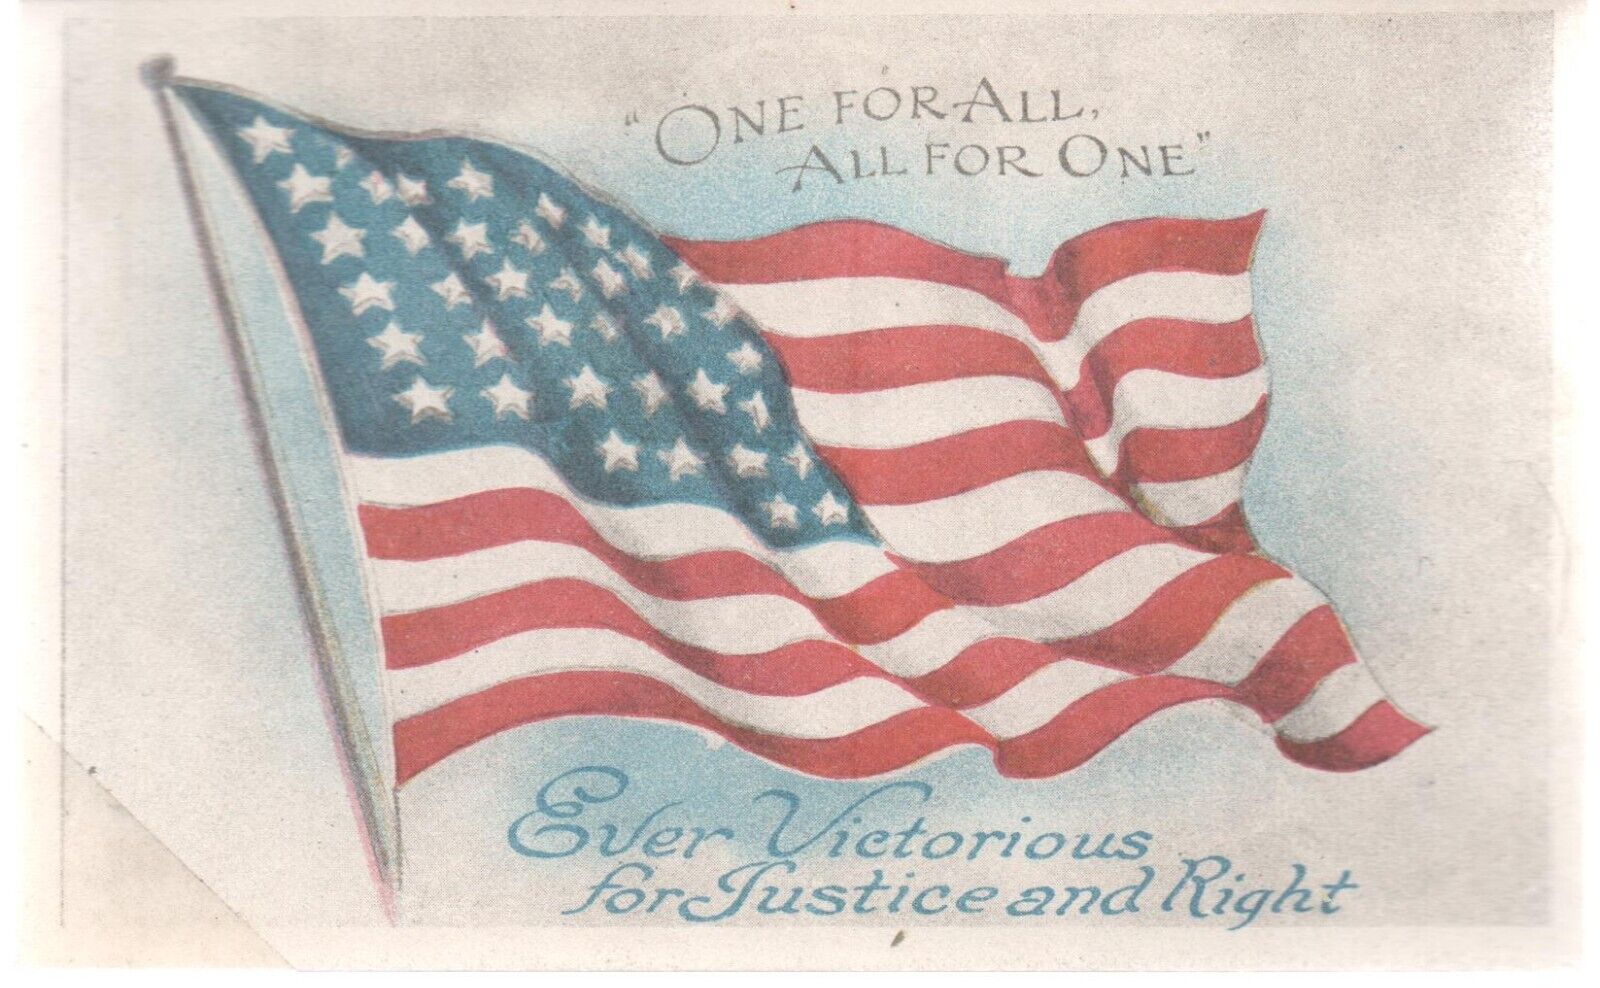 c1940s WW2 Era Patriotic One For All, All For One American Flag Postcard Vintage